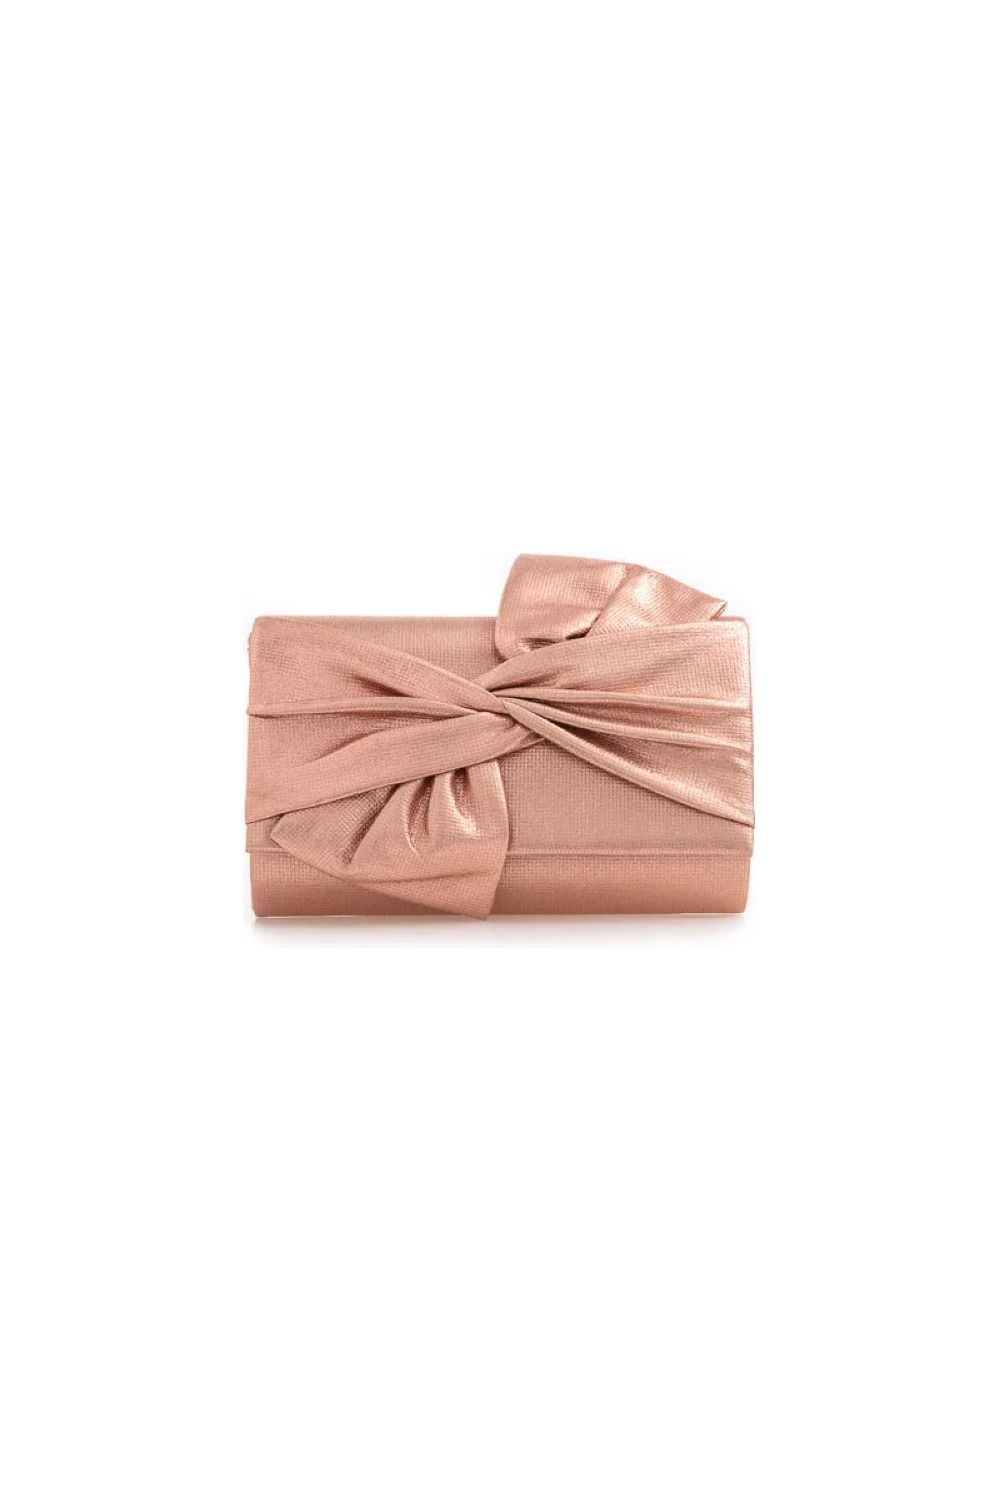 Champagne Evening Clutch Bag With Bow Detail ALW2562